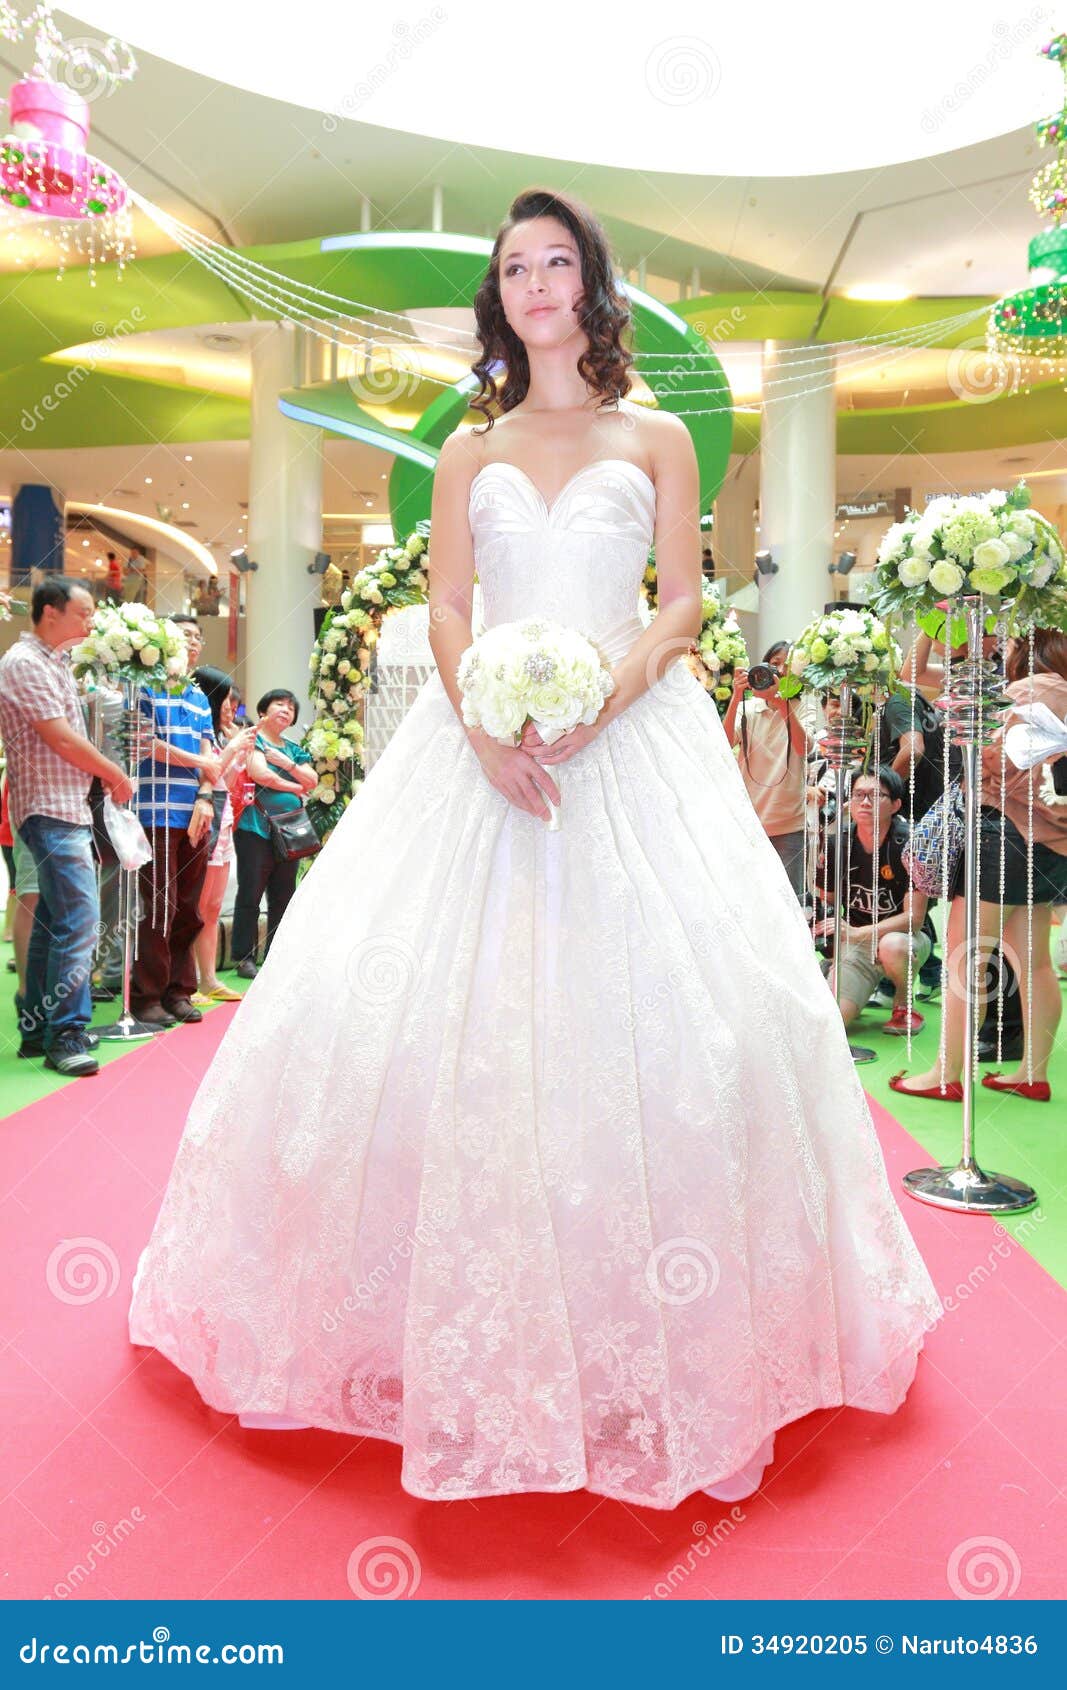 Flounce chiffon tiered skirt off the shoulder white ball gown wedding dress  with court train